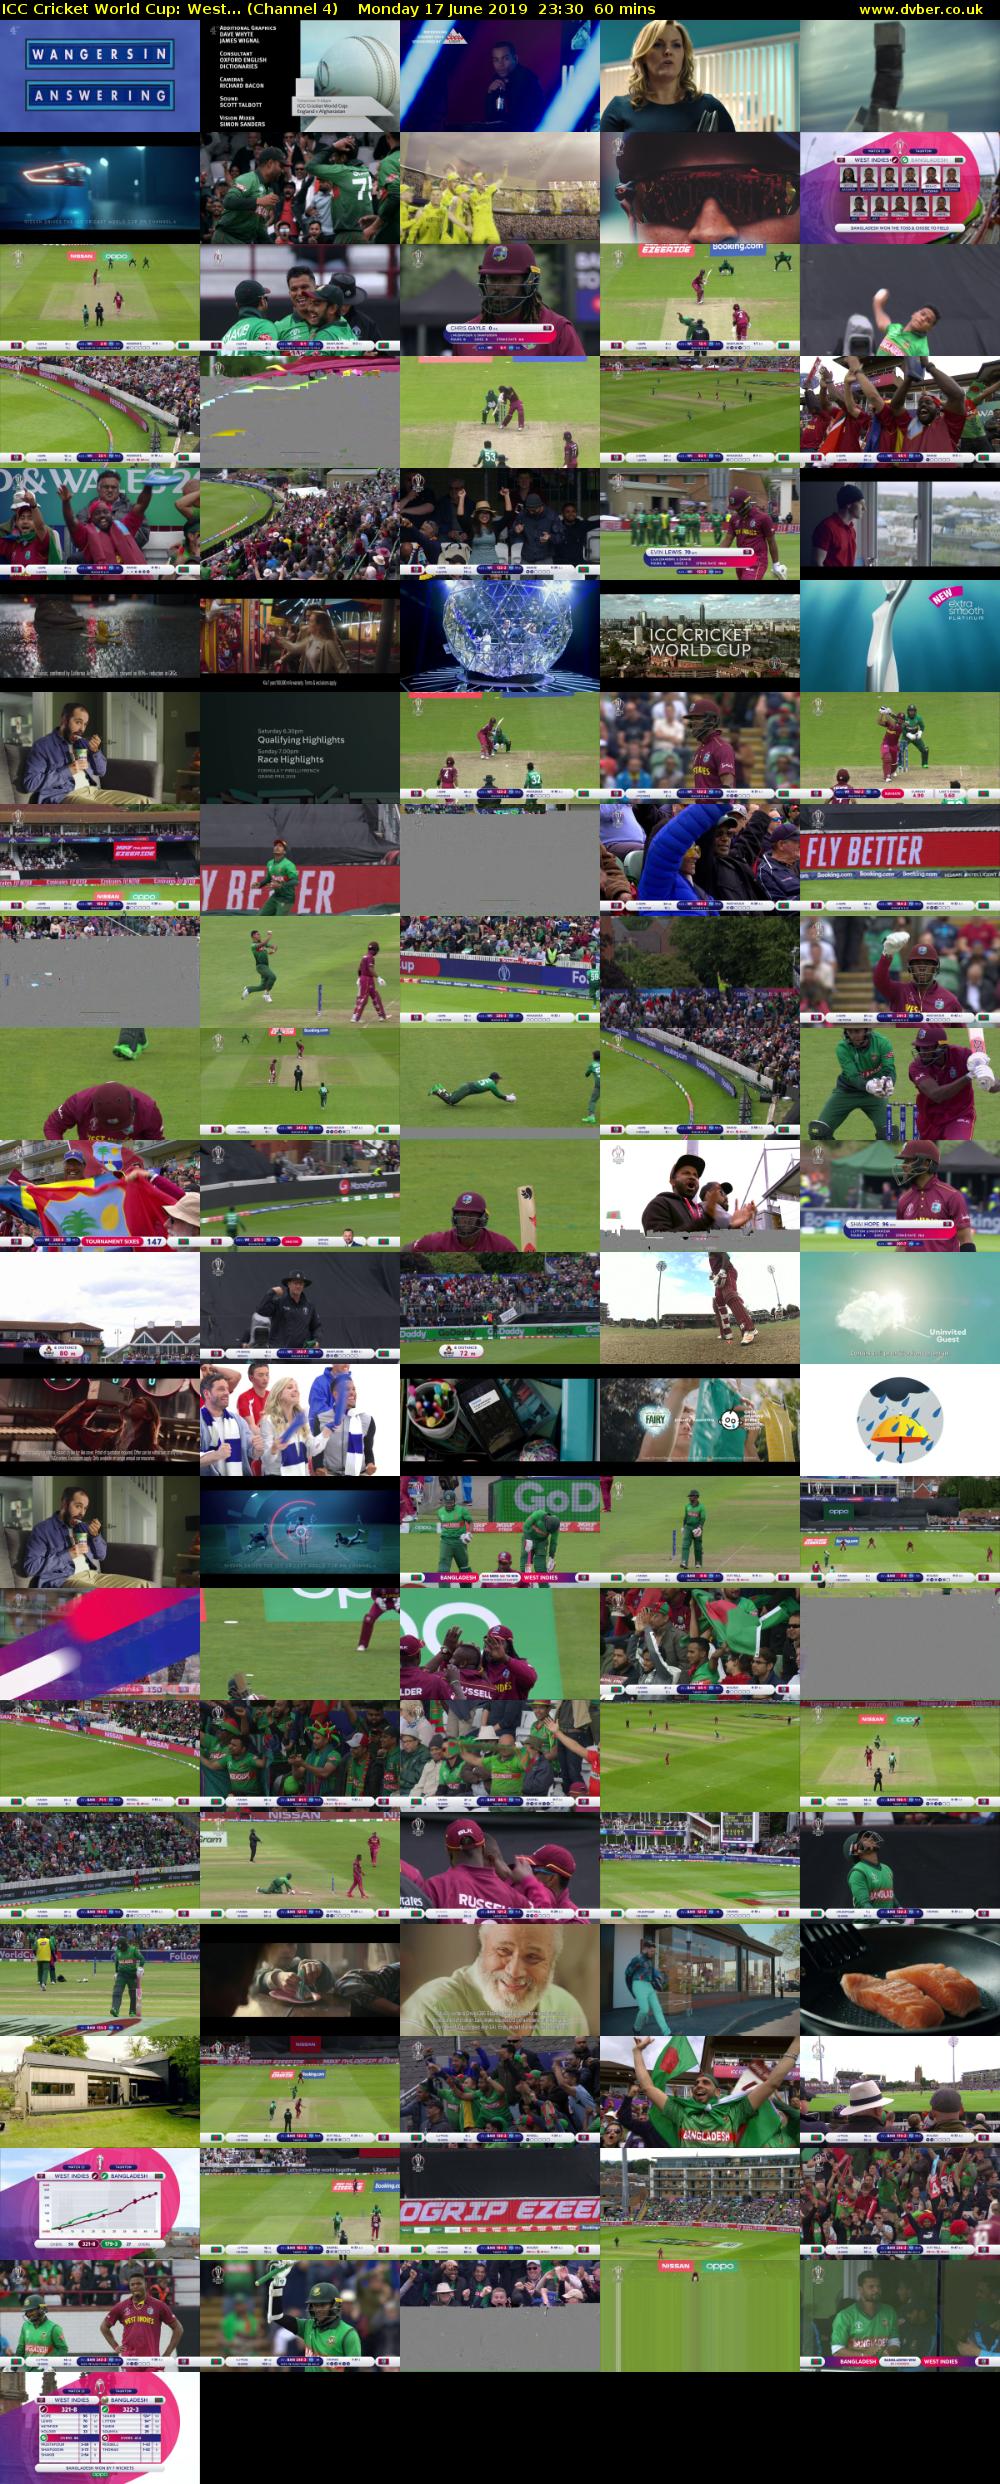 ICC Cricket World Cup: West... (Channel 4) Monday 17 June 2019 23:30 - 00:30